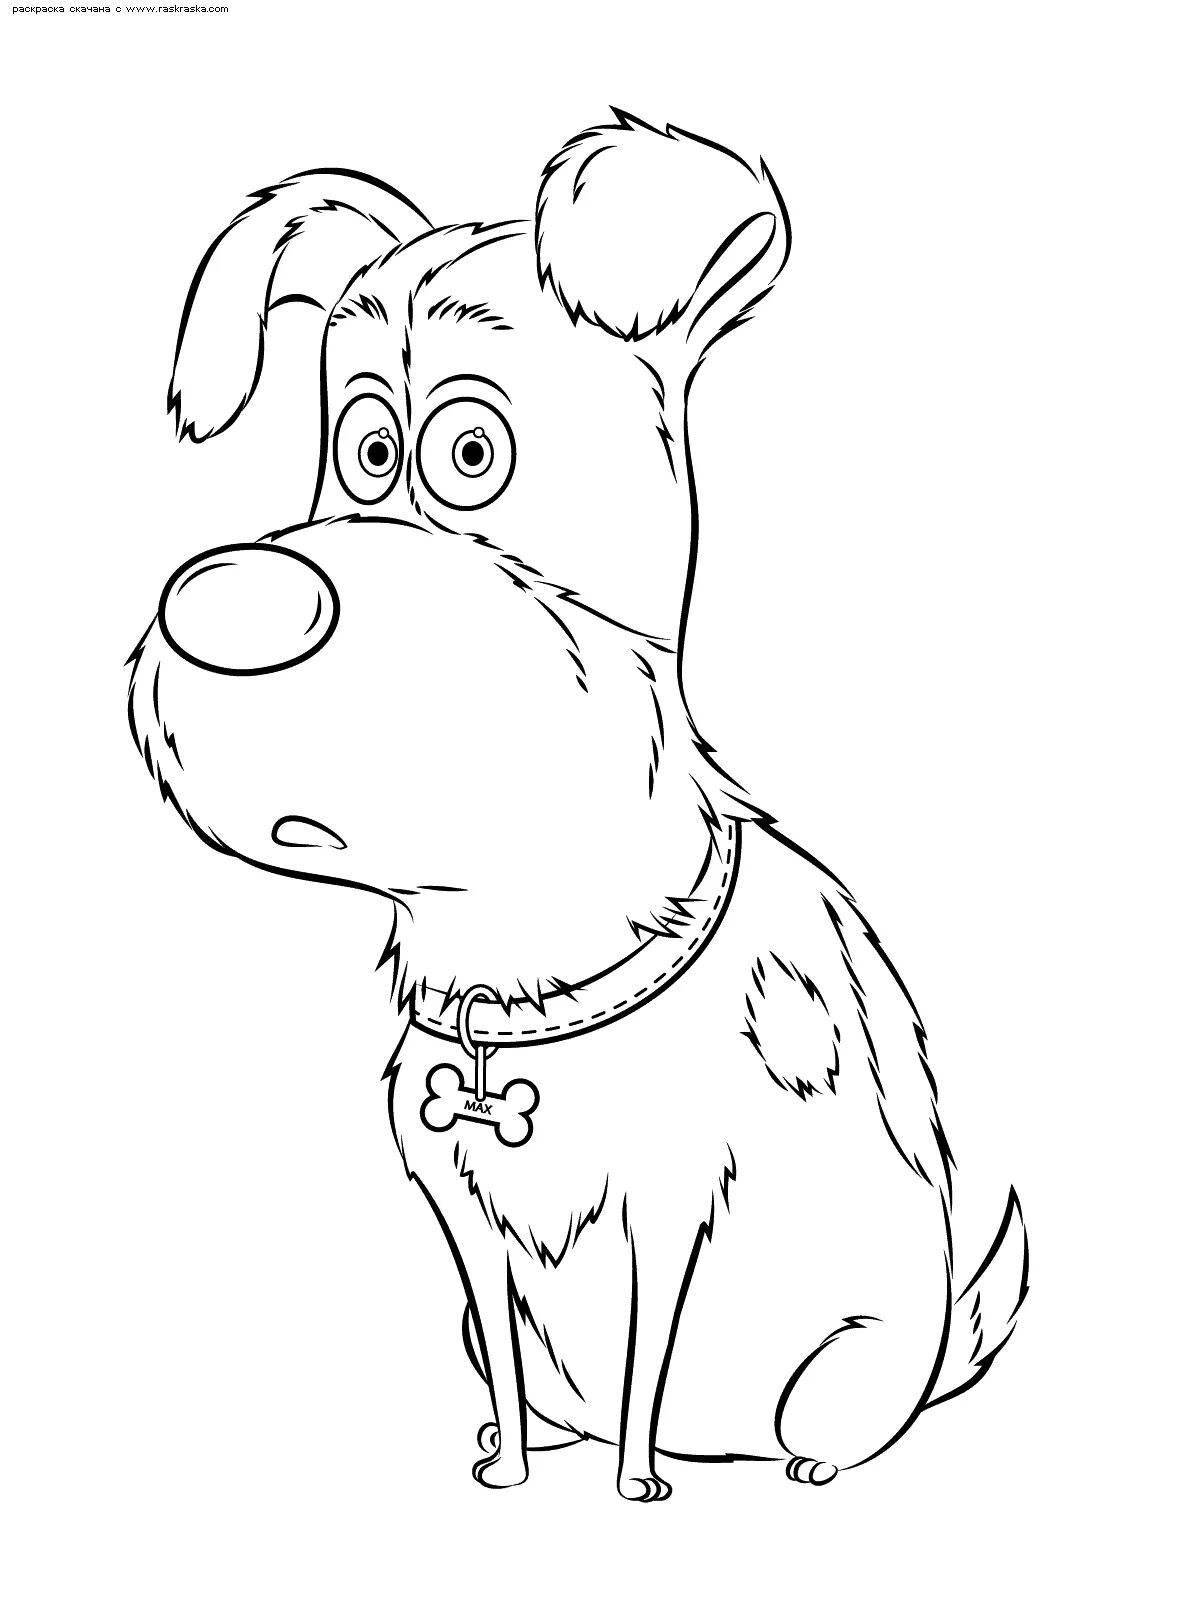 Max colorful coloring page